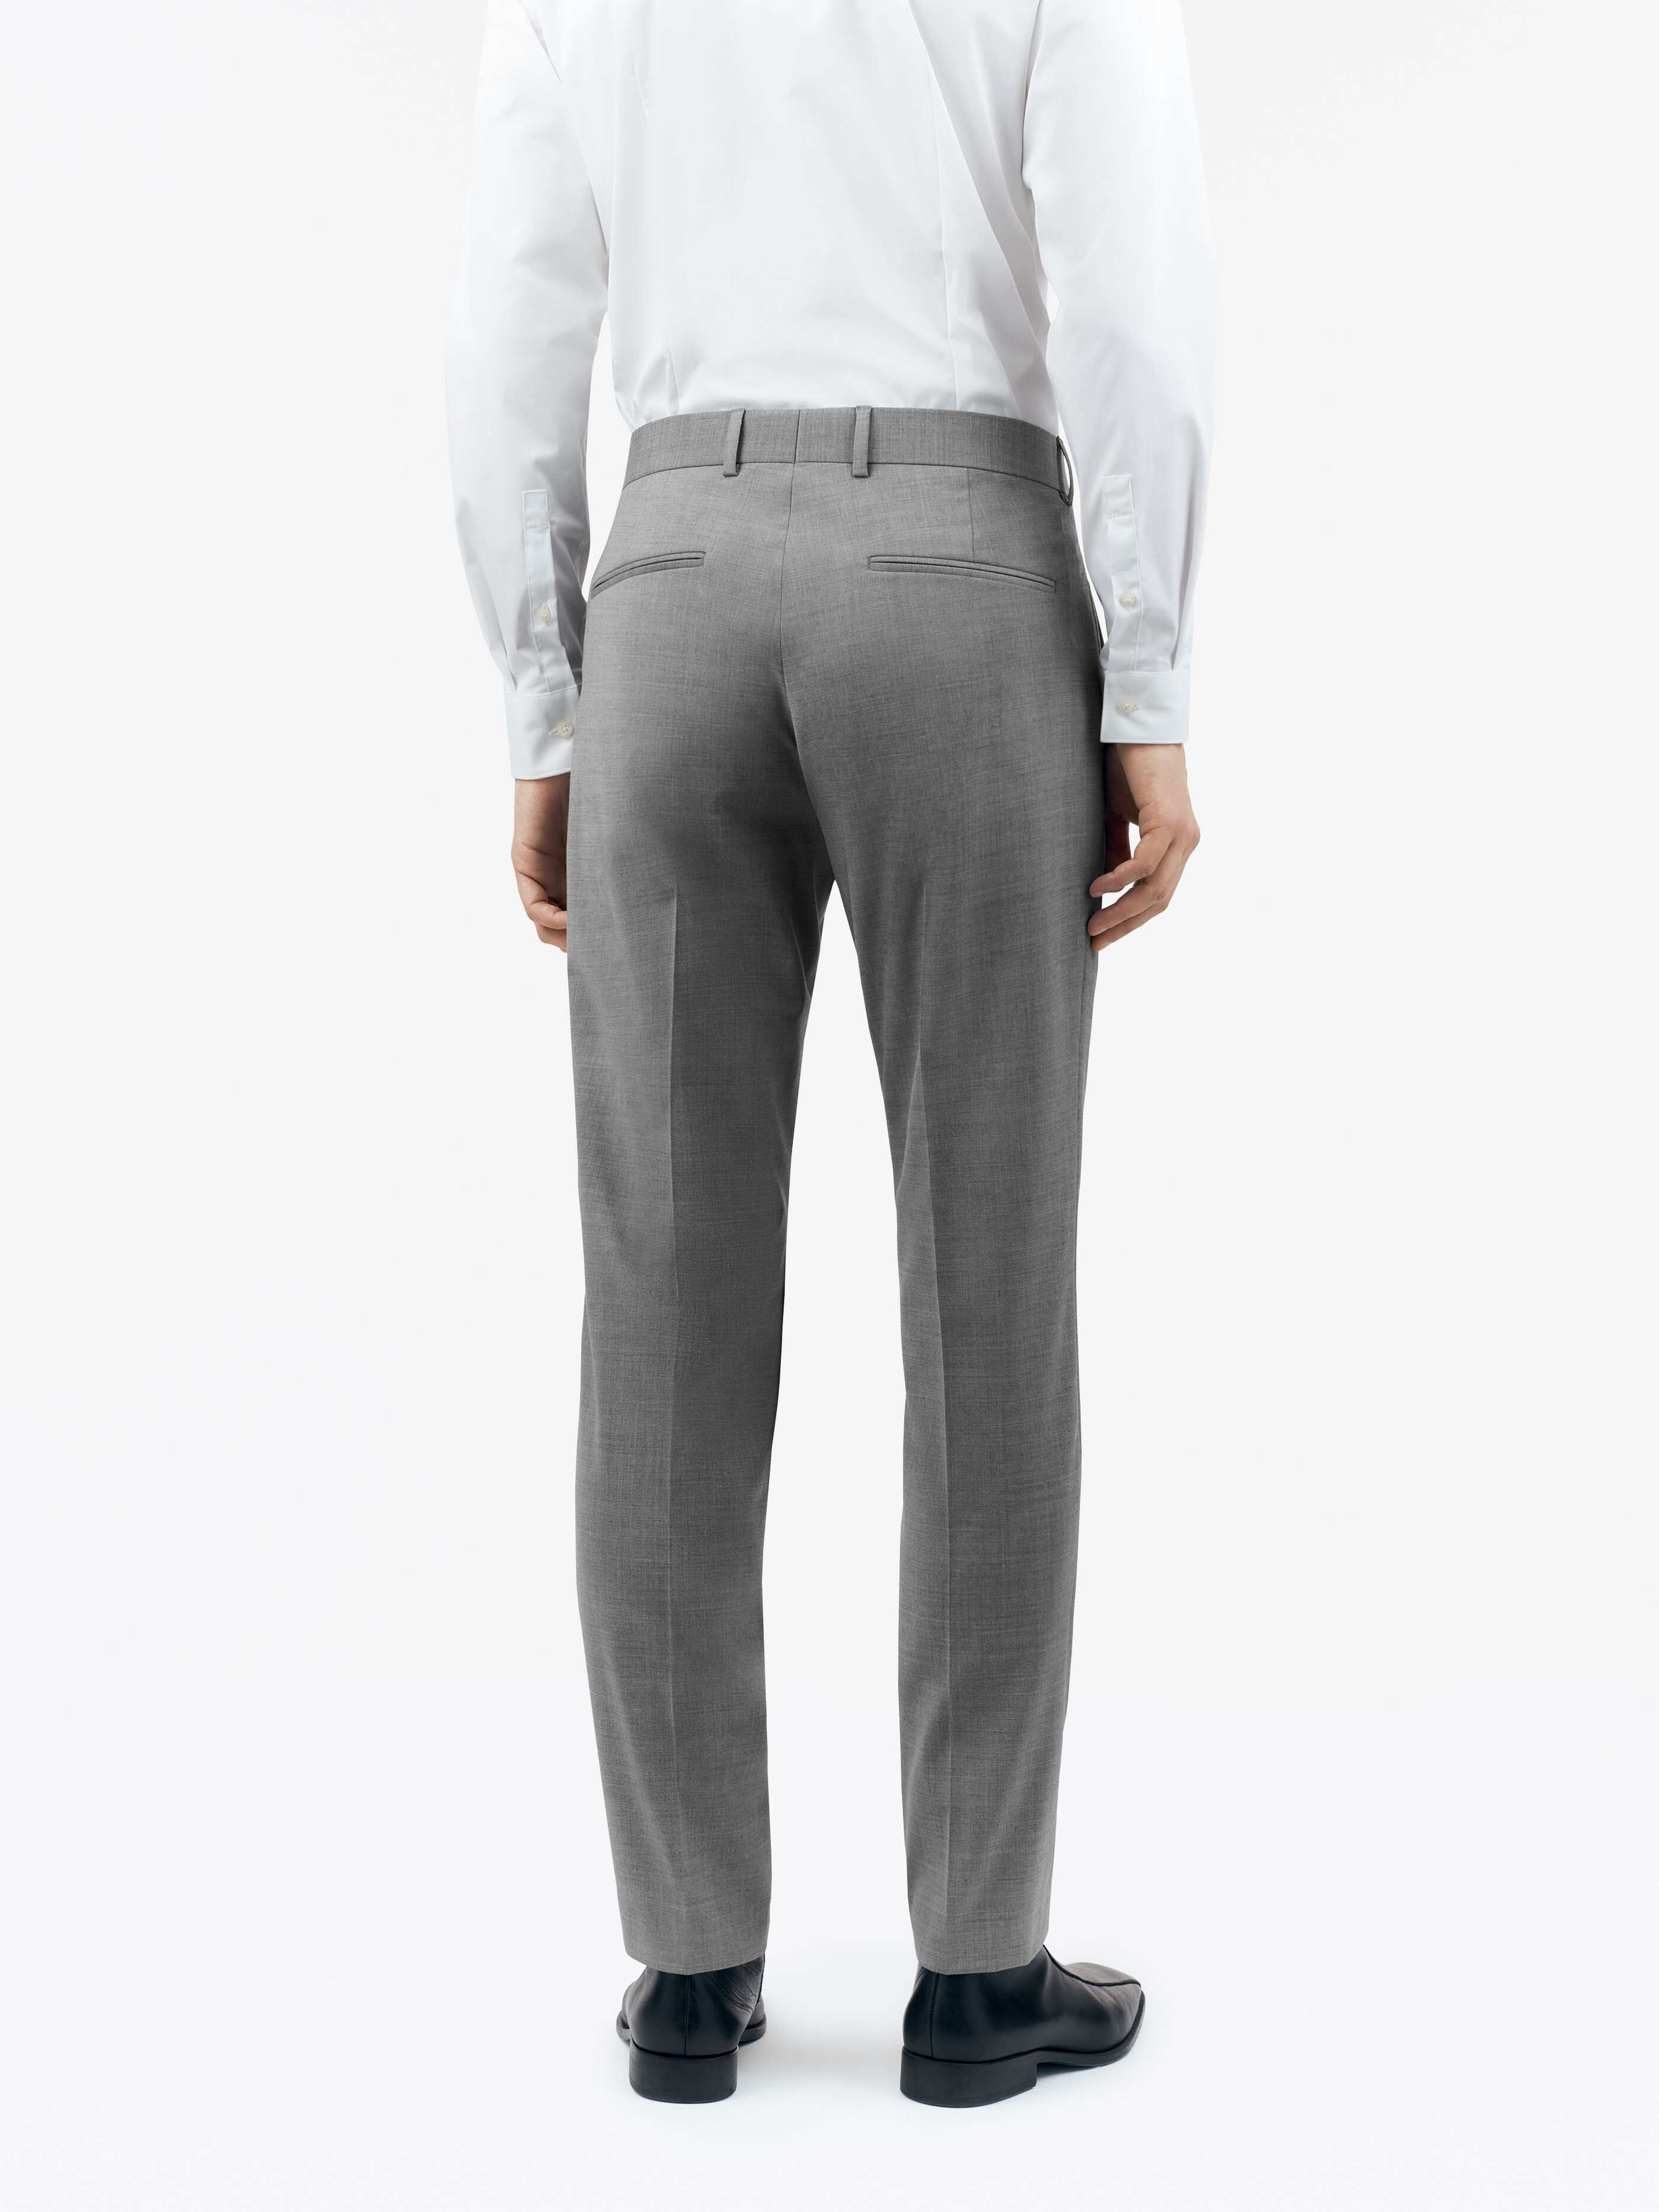 TIGER OF SWEDEN Tenutas Trousers in Grey  T70699047| Shop from eightywingold an official brand partner for Tiger of Sweden Canada and US.